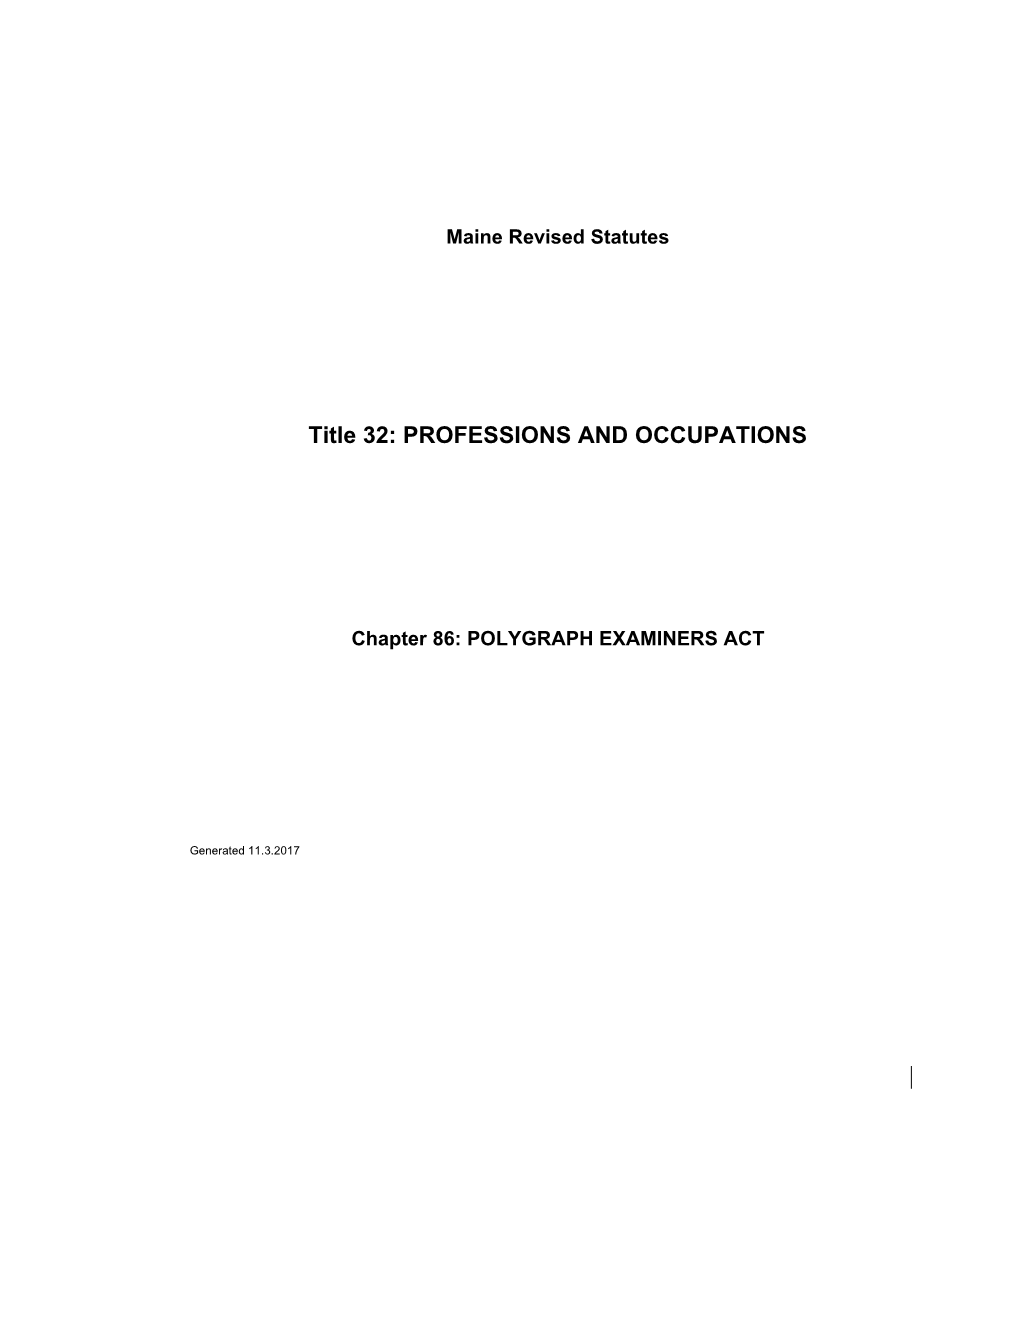 MRS Title 32 7361. POLYGRAPH EXAMINER's DUTIES and RESPONSIBILITIES GENERALLY